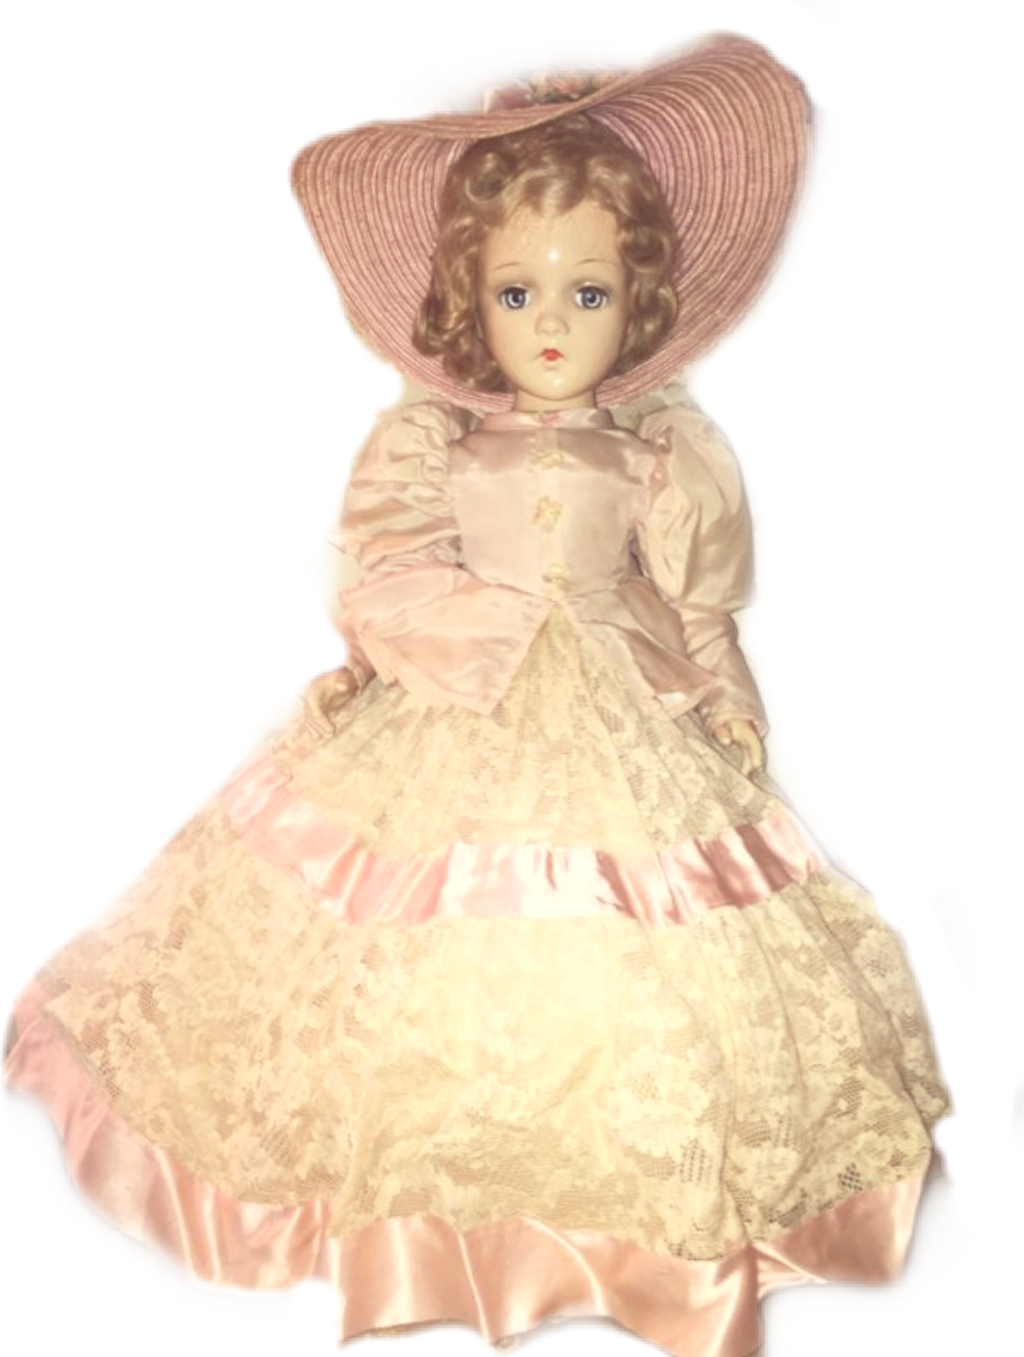 A Doll In A Dress And Hat